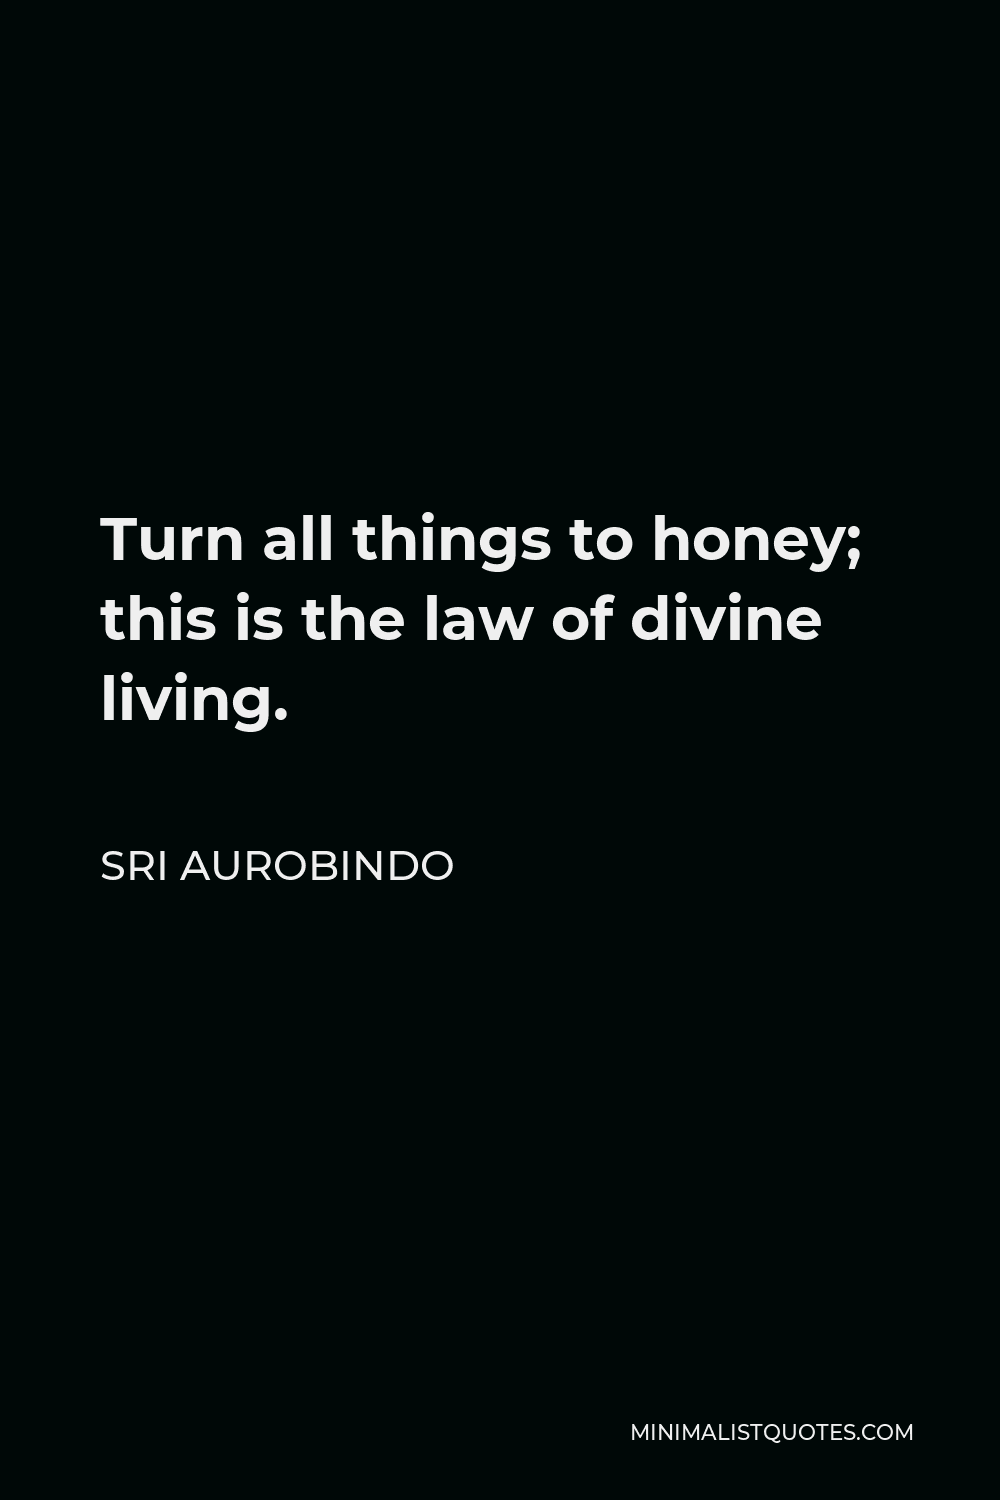 Sri Aurobindo Quote - Turn all things to honey; this is the law of divine living.